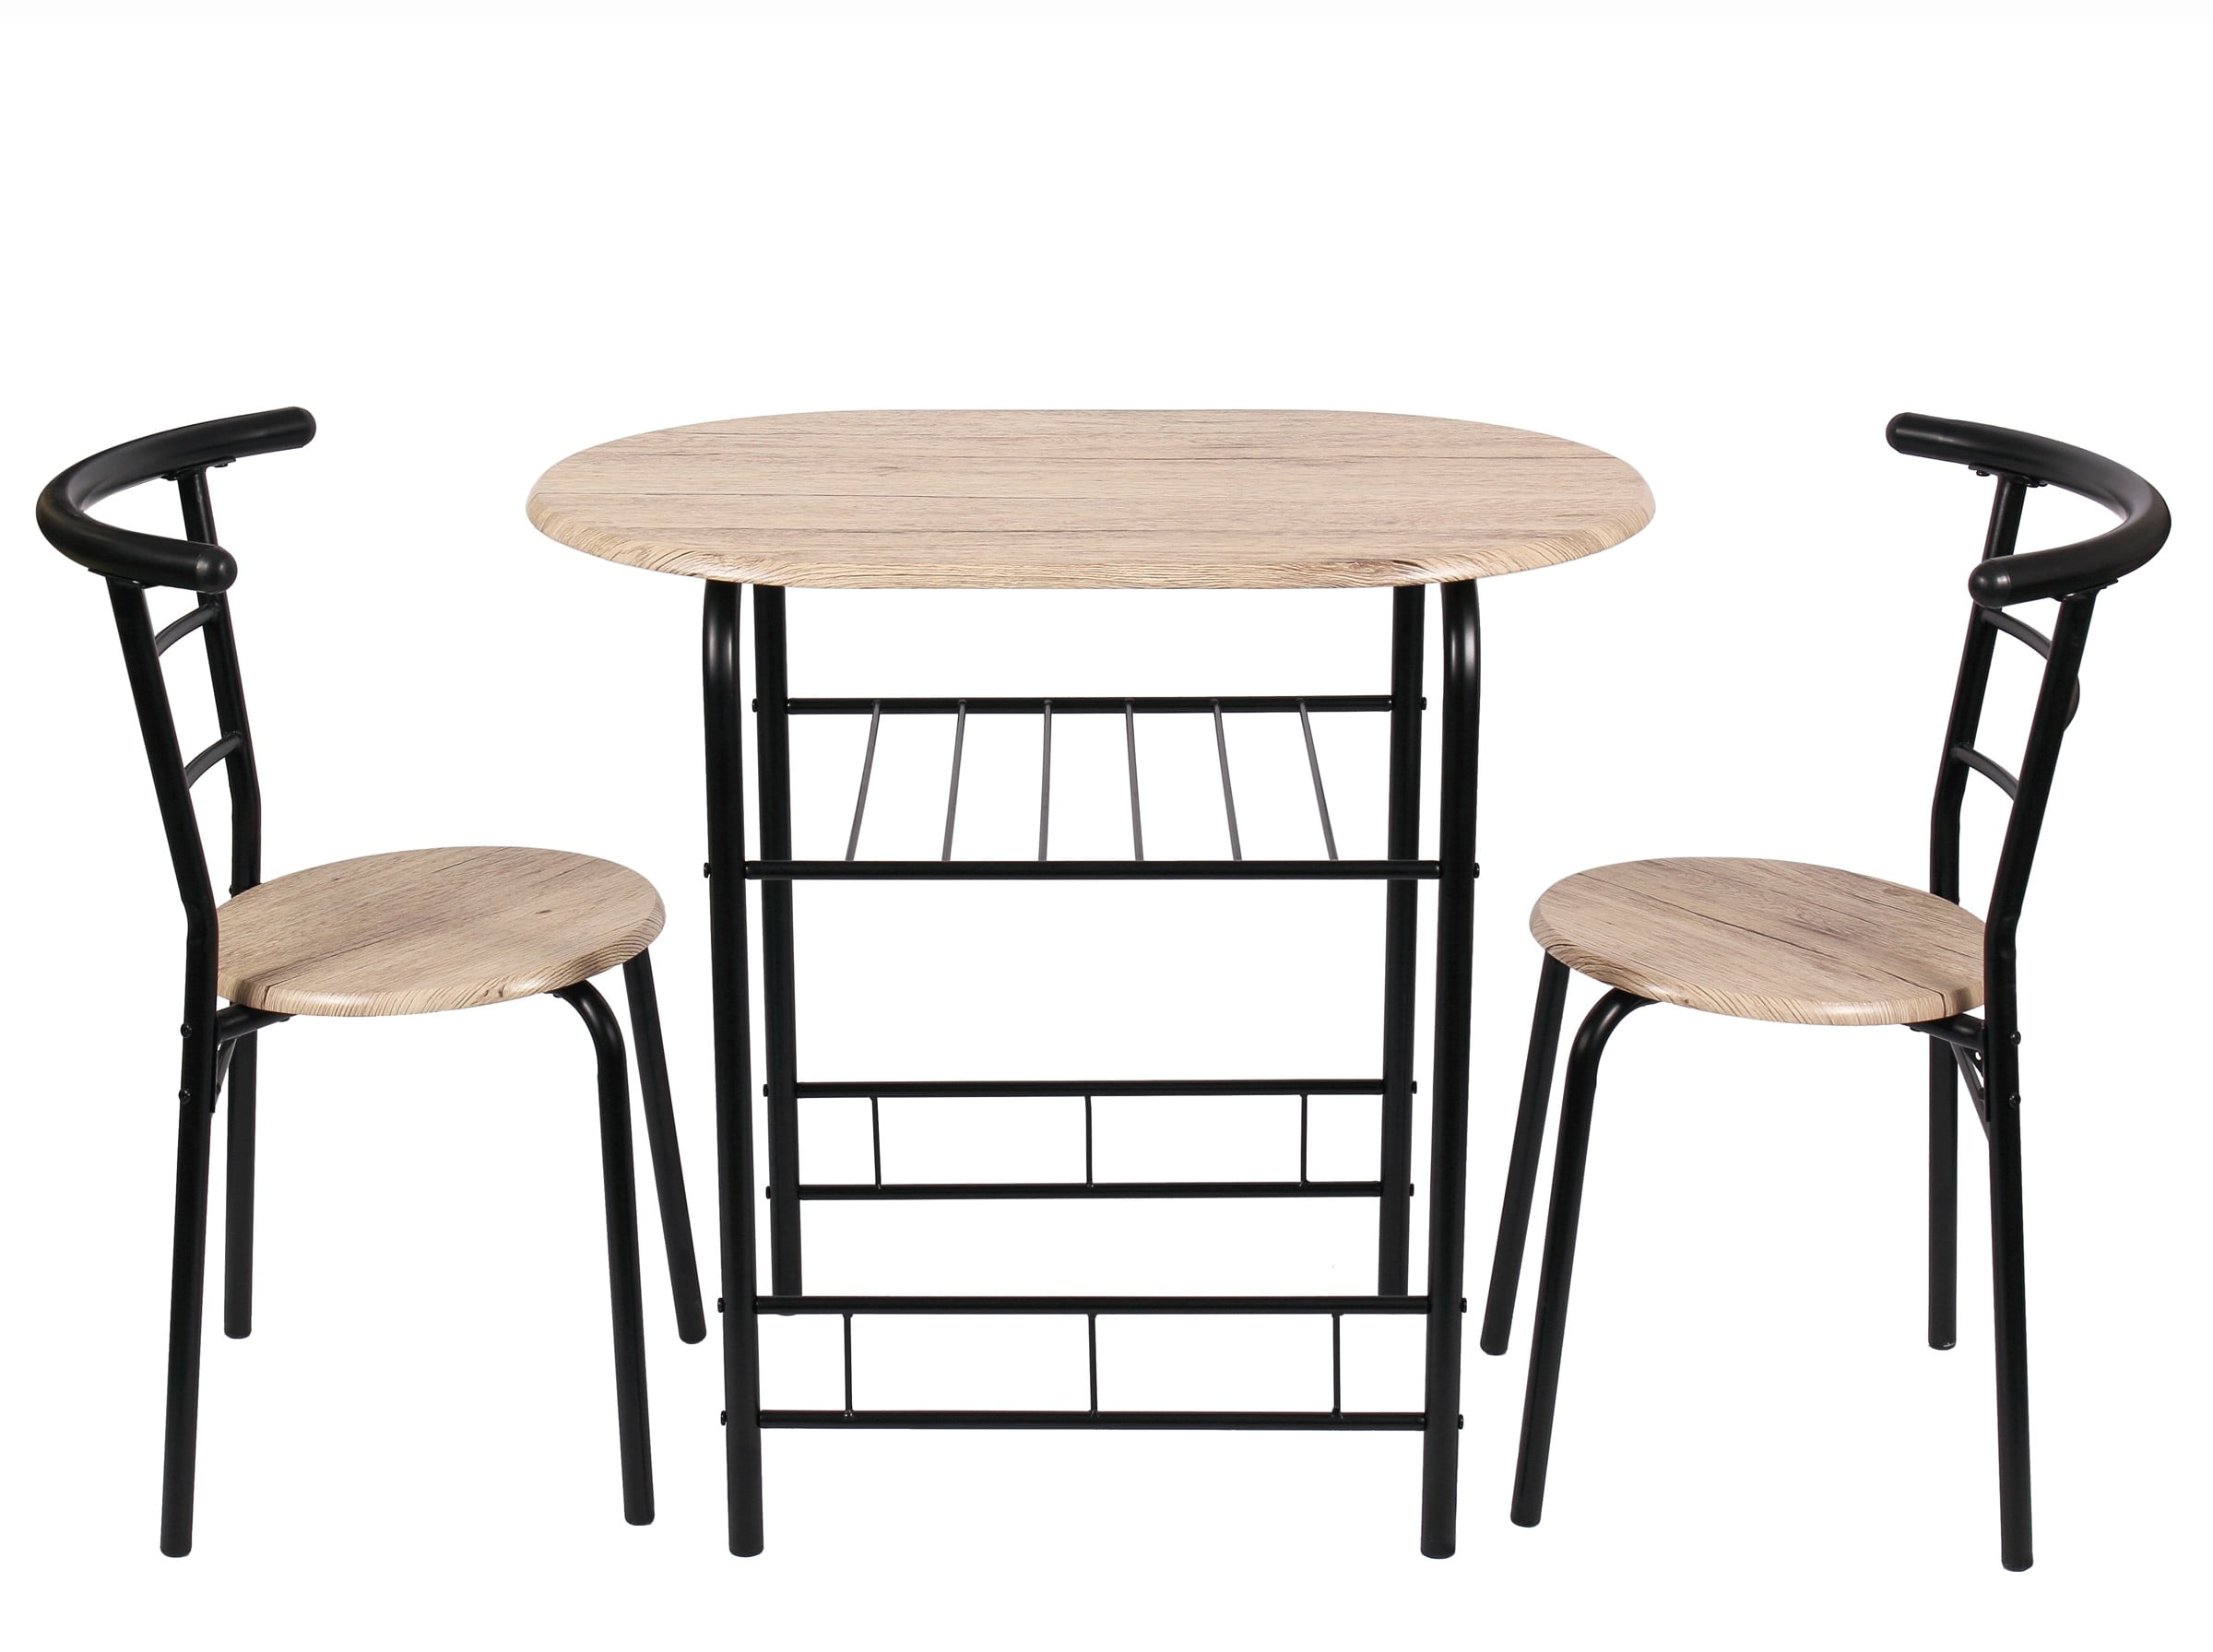 Mainstays 3 Piece Metal and Wood Dining Set, Include 1 Table and 2 Chairs, Grey Color (2 People Seating Capacity)